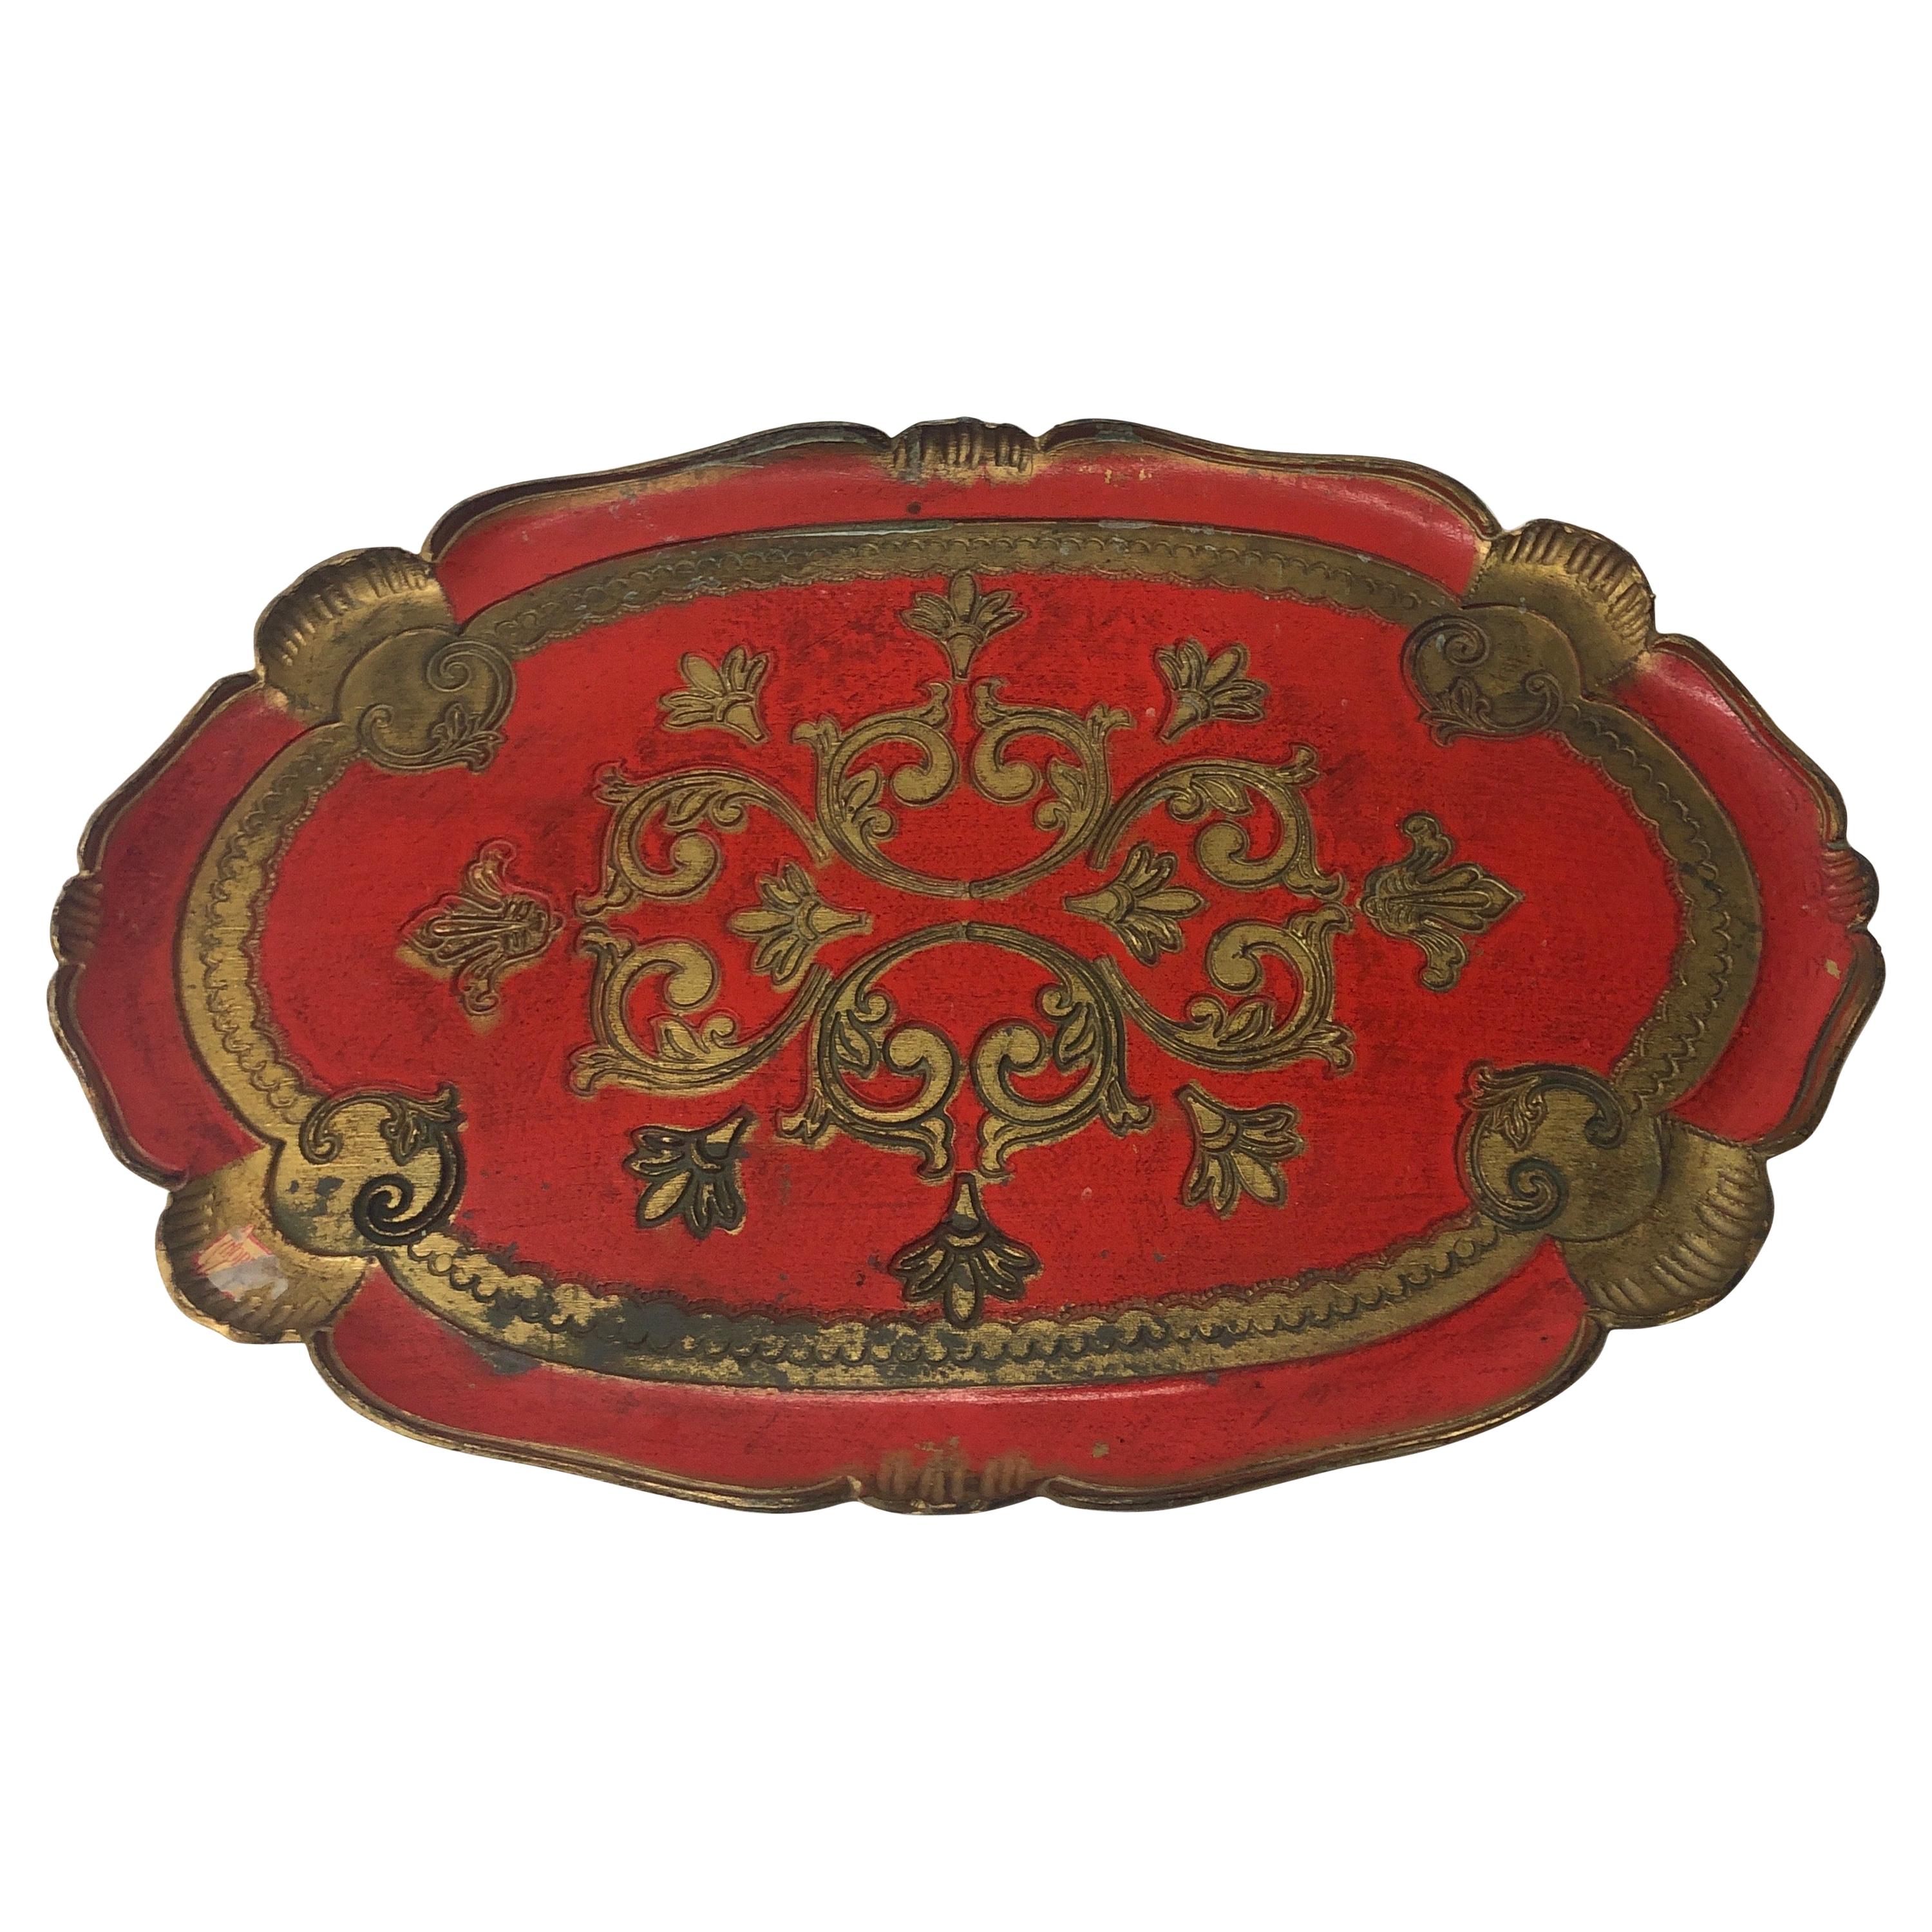 Large Red and Gold Florentine Serving Tray